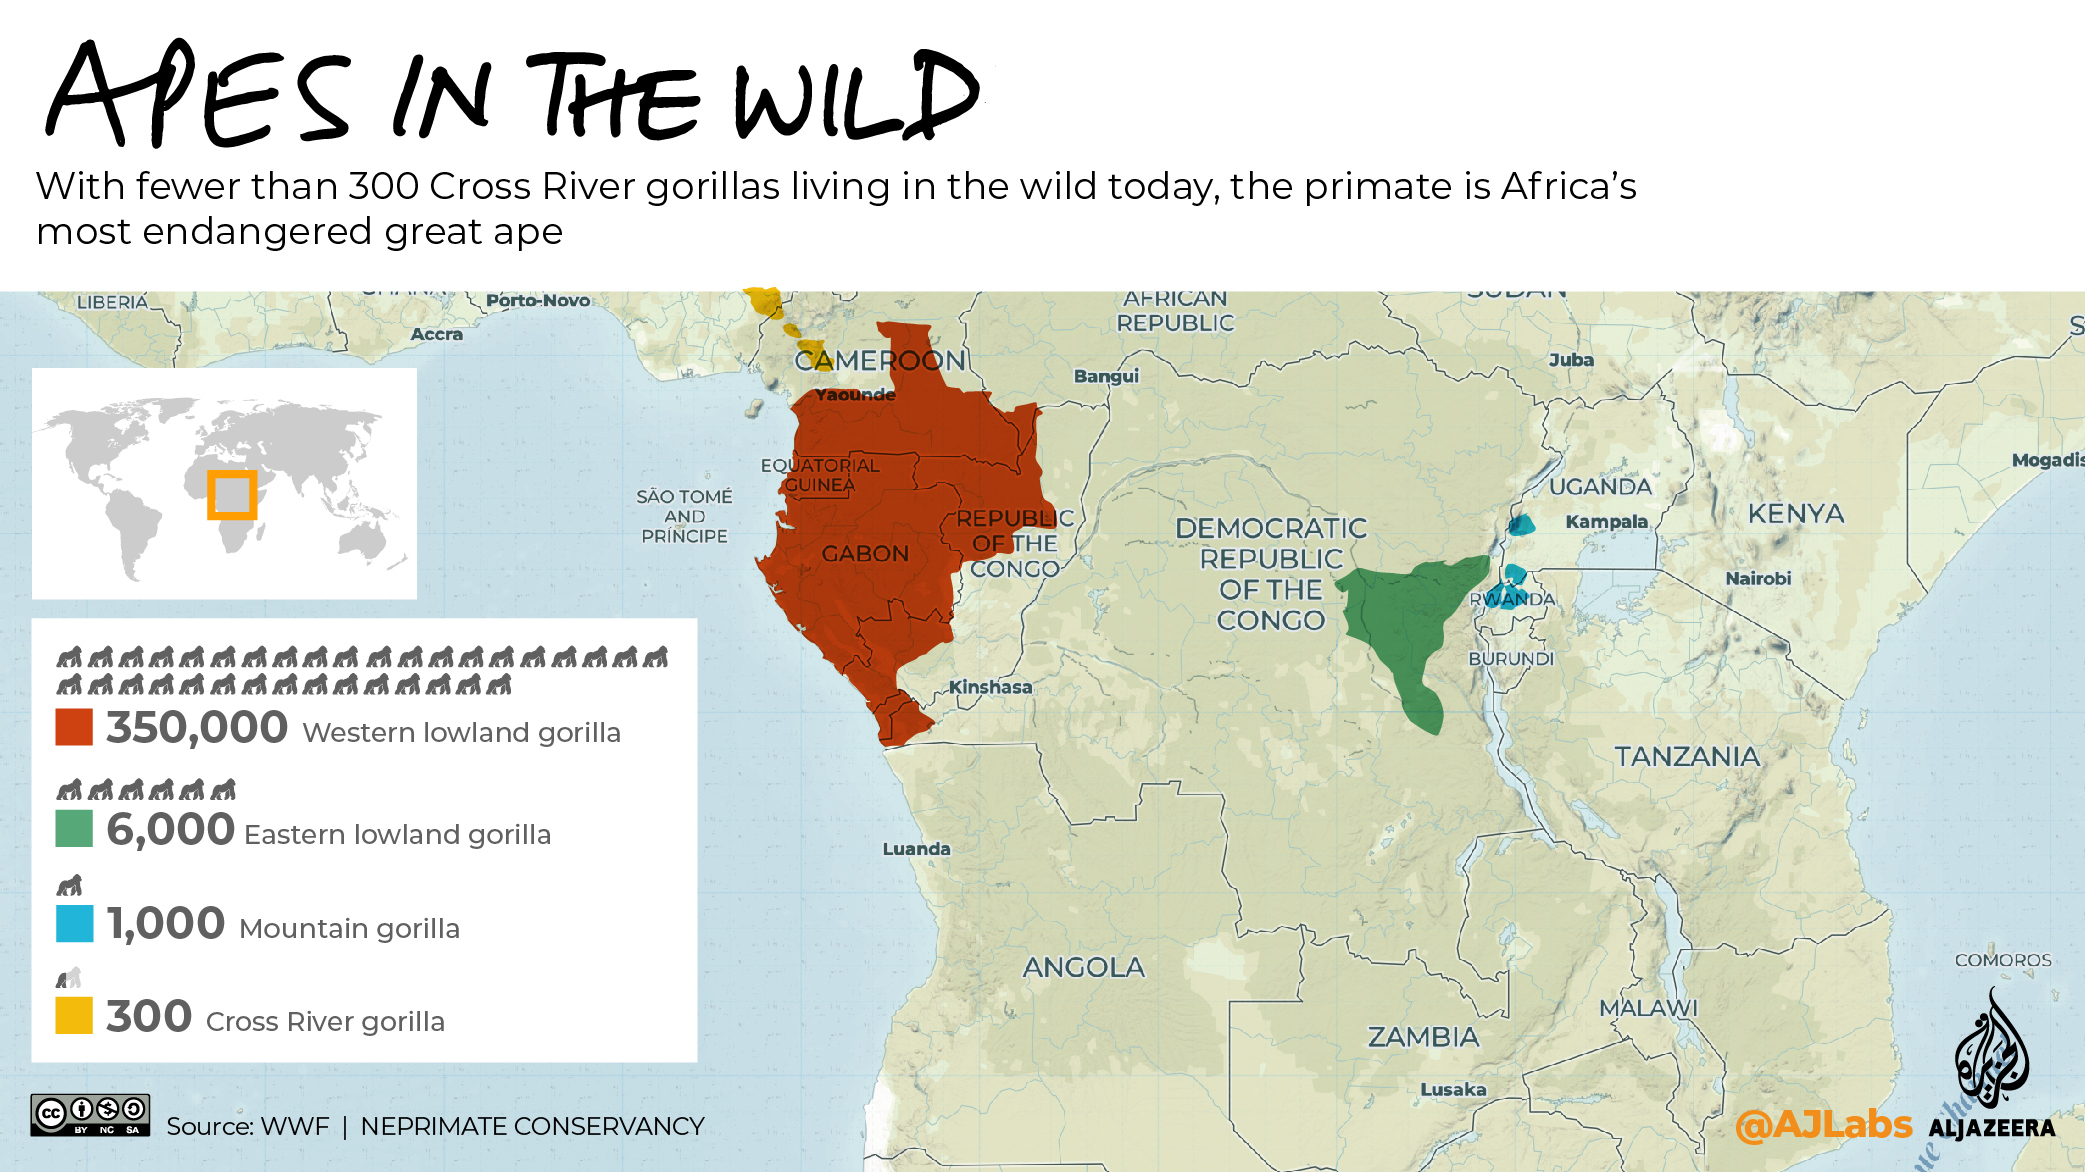 INTERACTIVE: The Green Read - gorillas and tigers